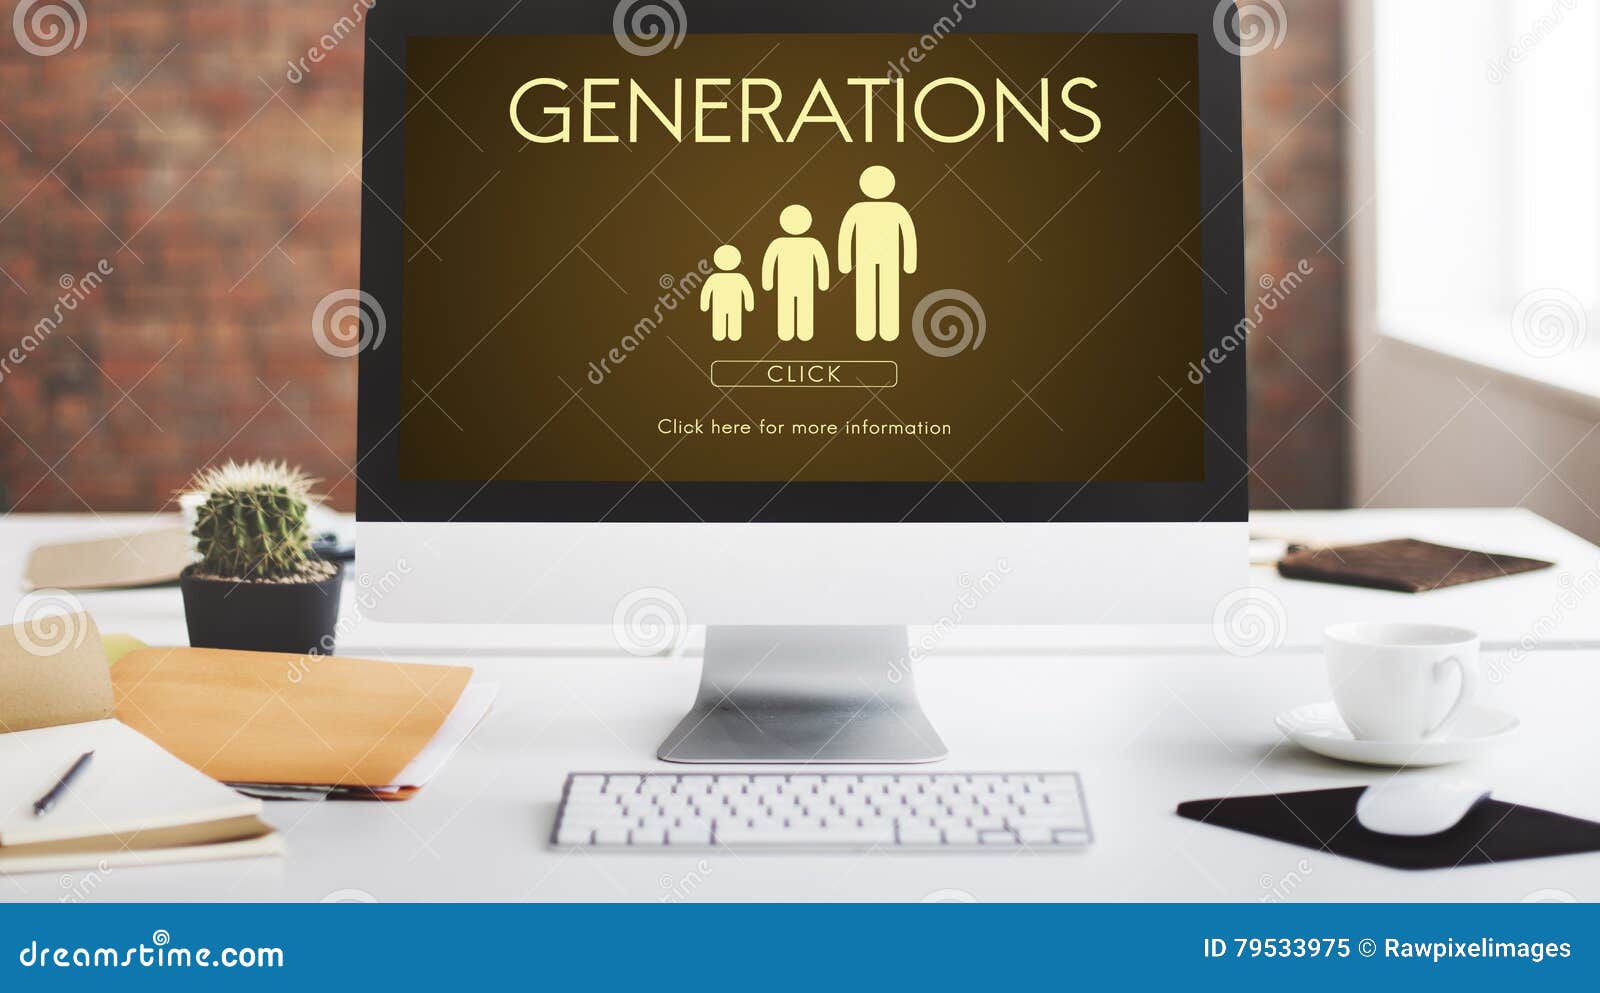 generations family togetherness relationship concept